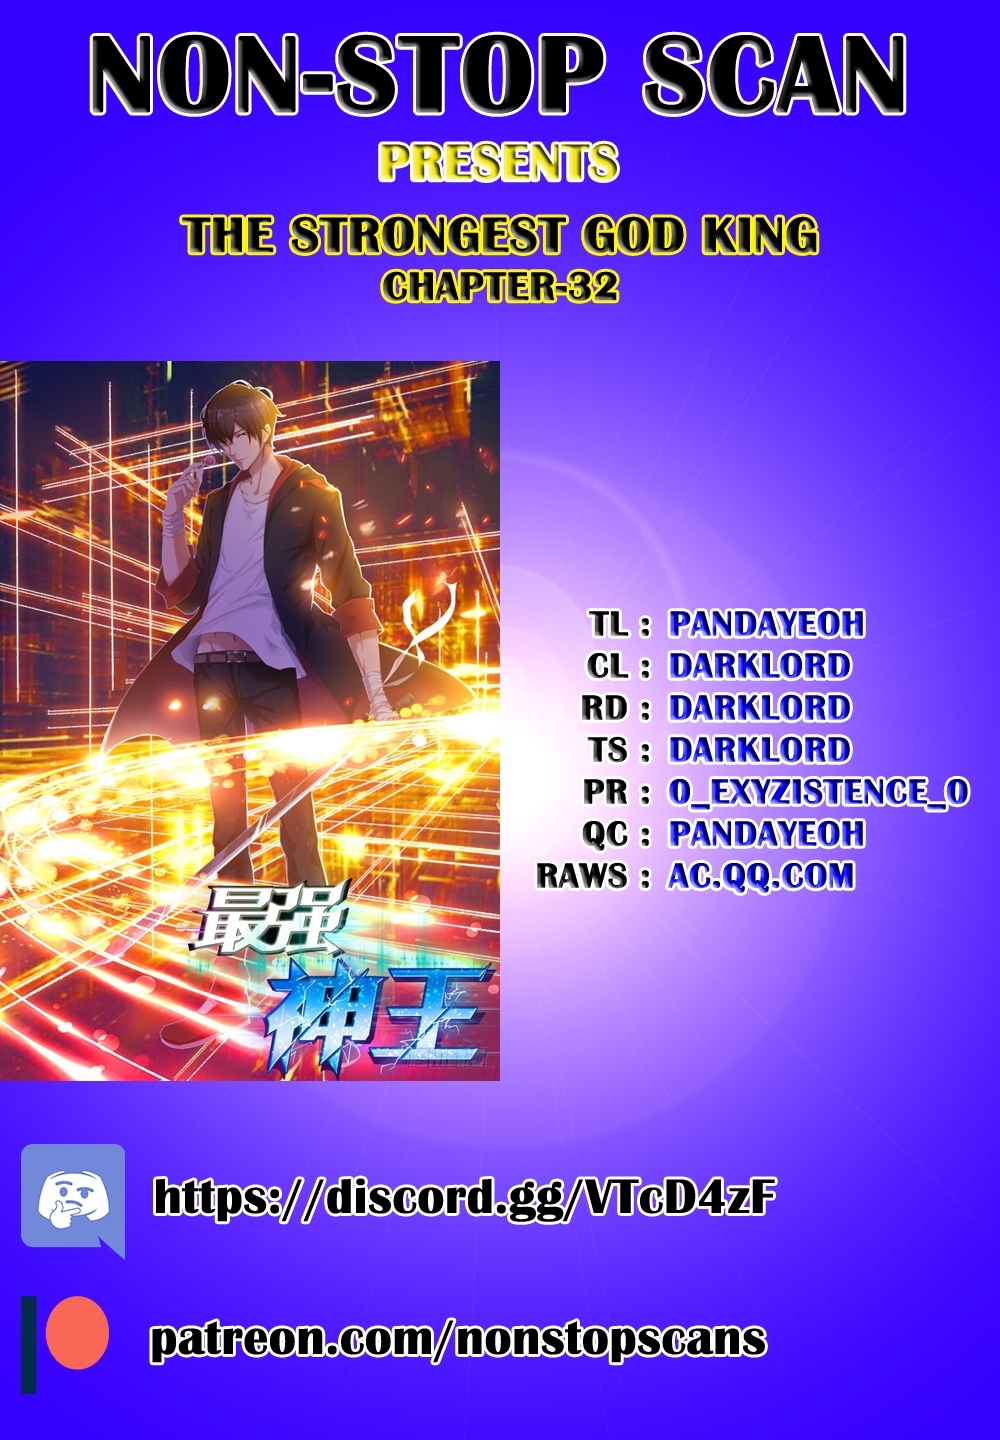 The Strongest God King Ch. 32